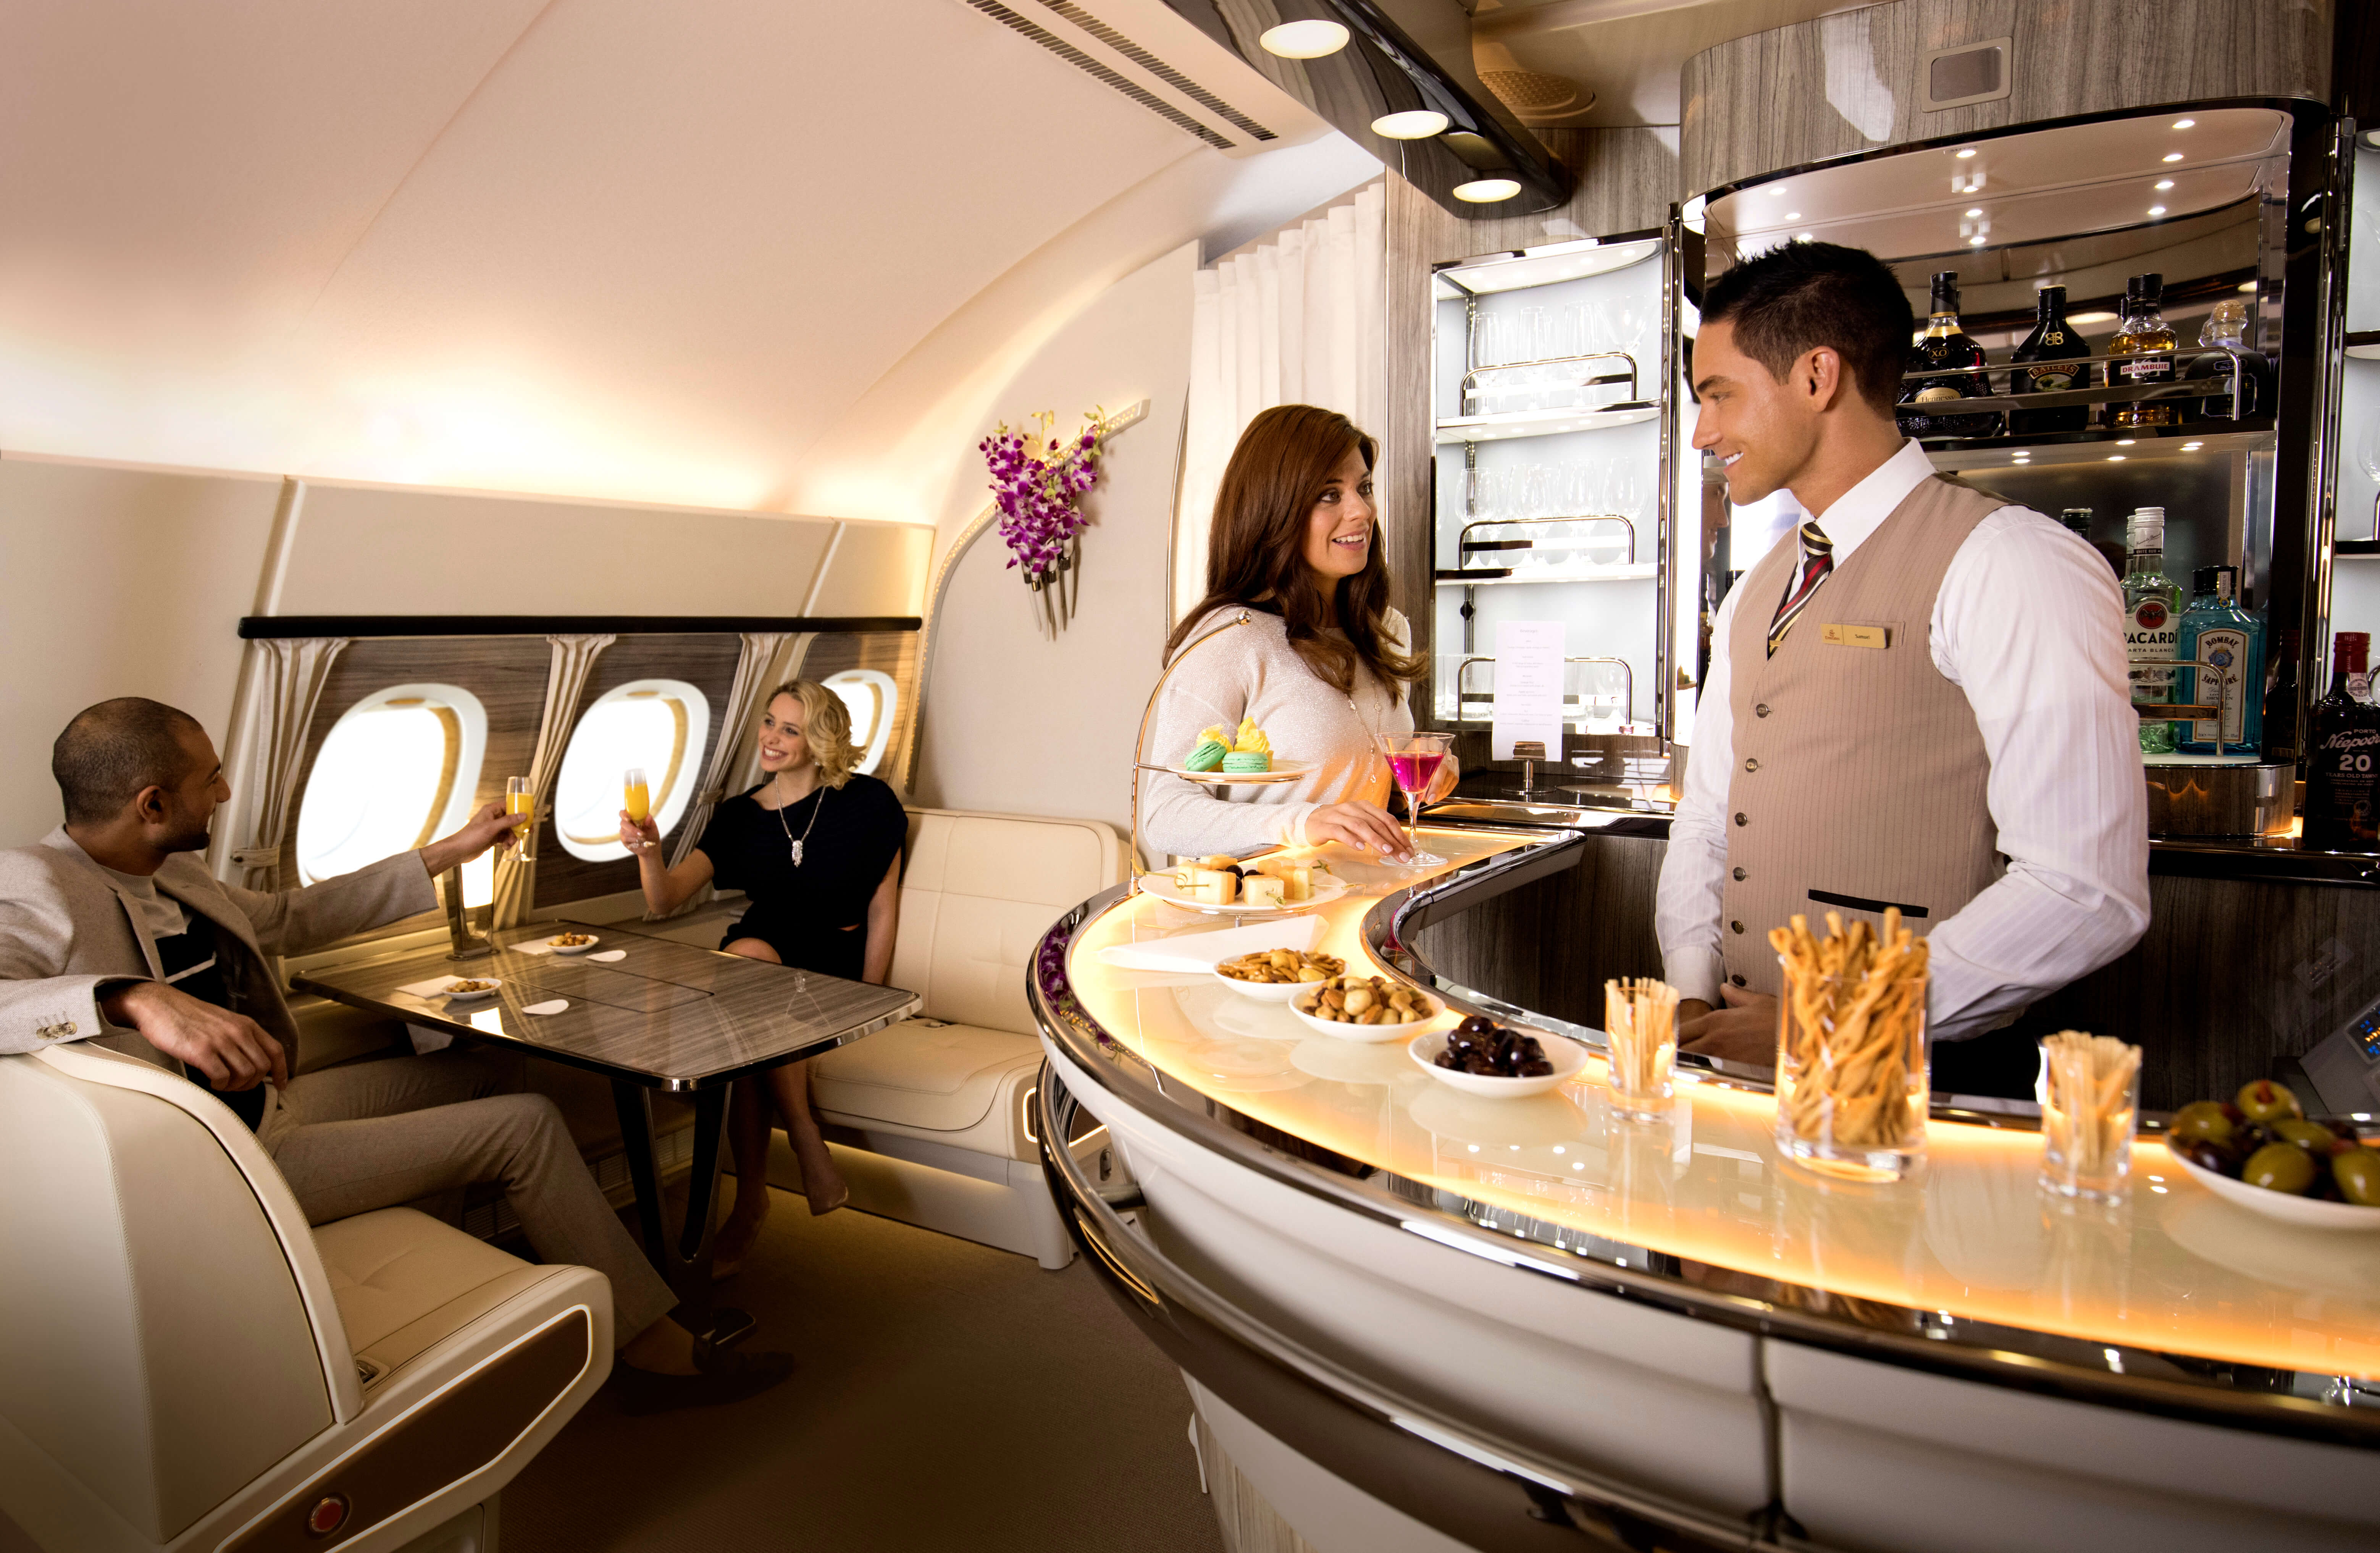 Emirates Skywards invites members to fly more and earn more